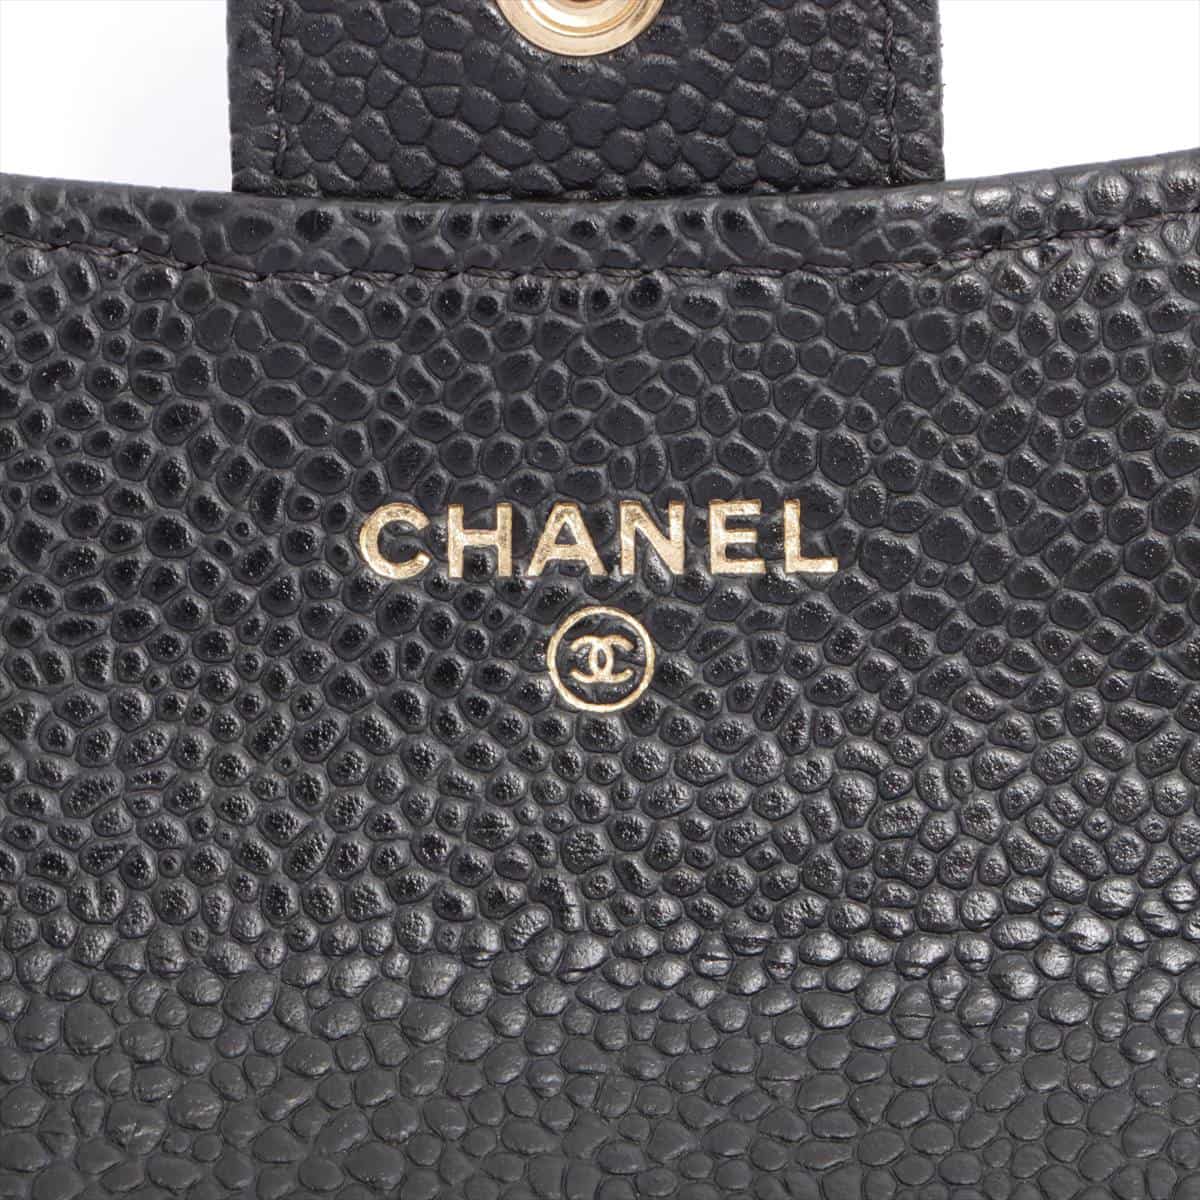 Chanel Matelasse Caviarskin Coin case Coco Mark Black Gold Metal fittings 28th